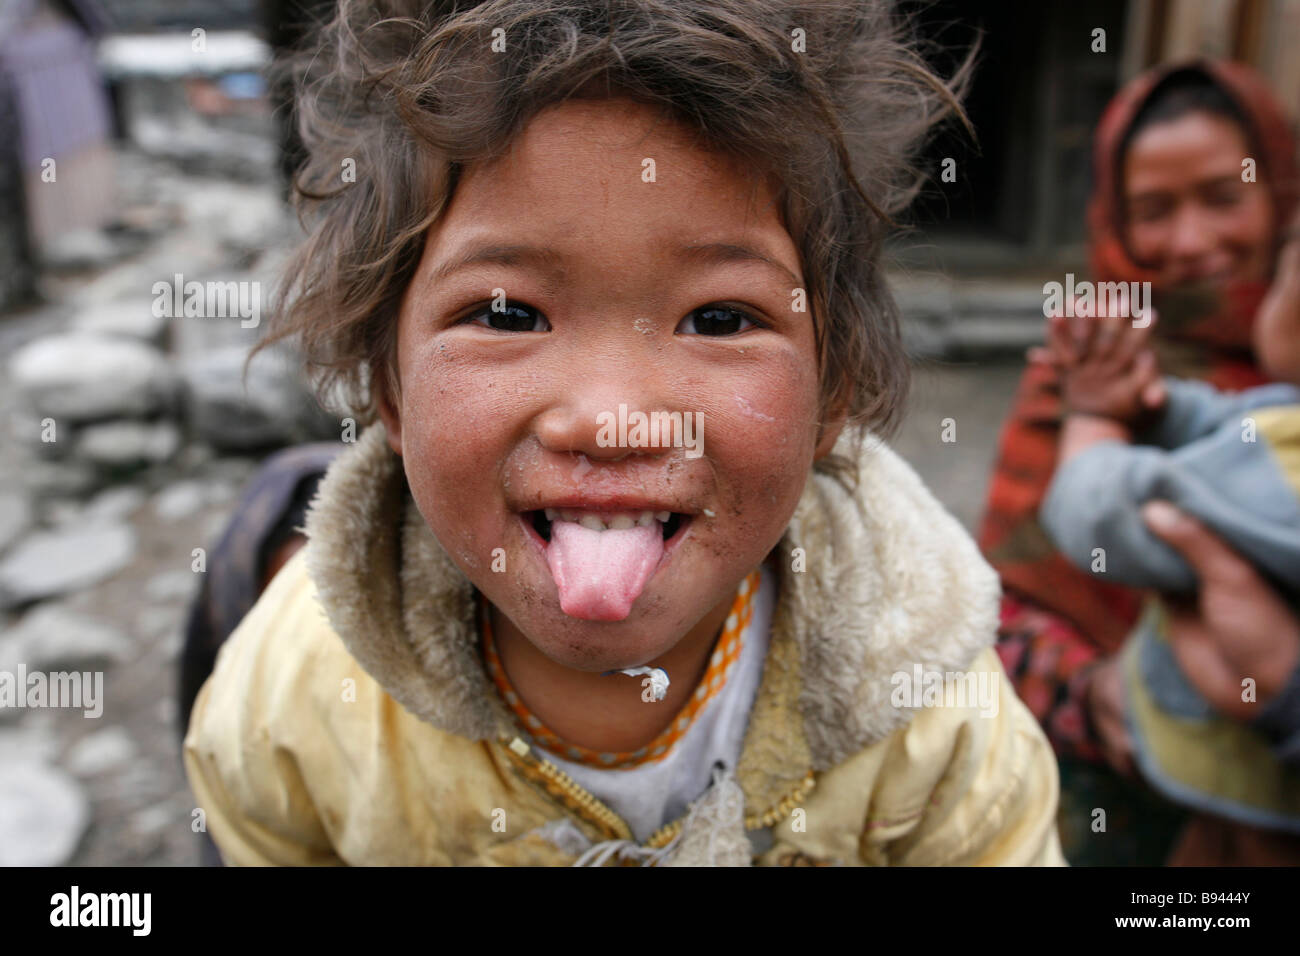 Annapurna Nepal 20 March 2008 Funny little poor kid sticking his tongue out at trekkers Stock Photo